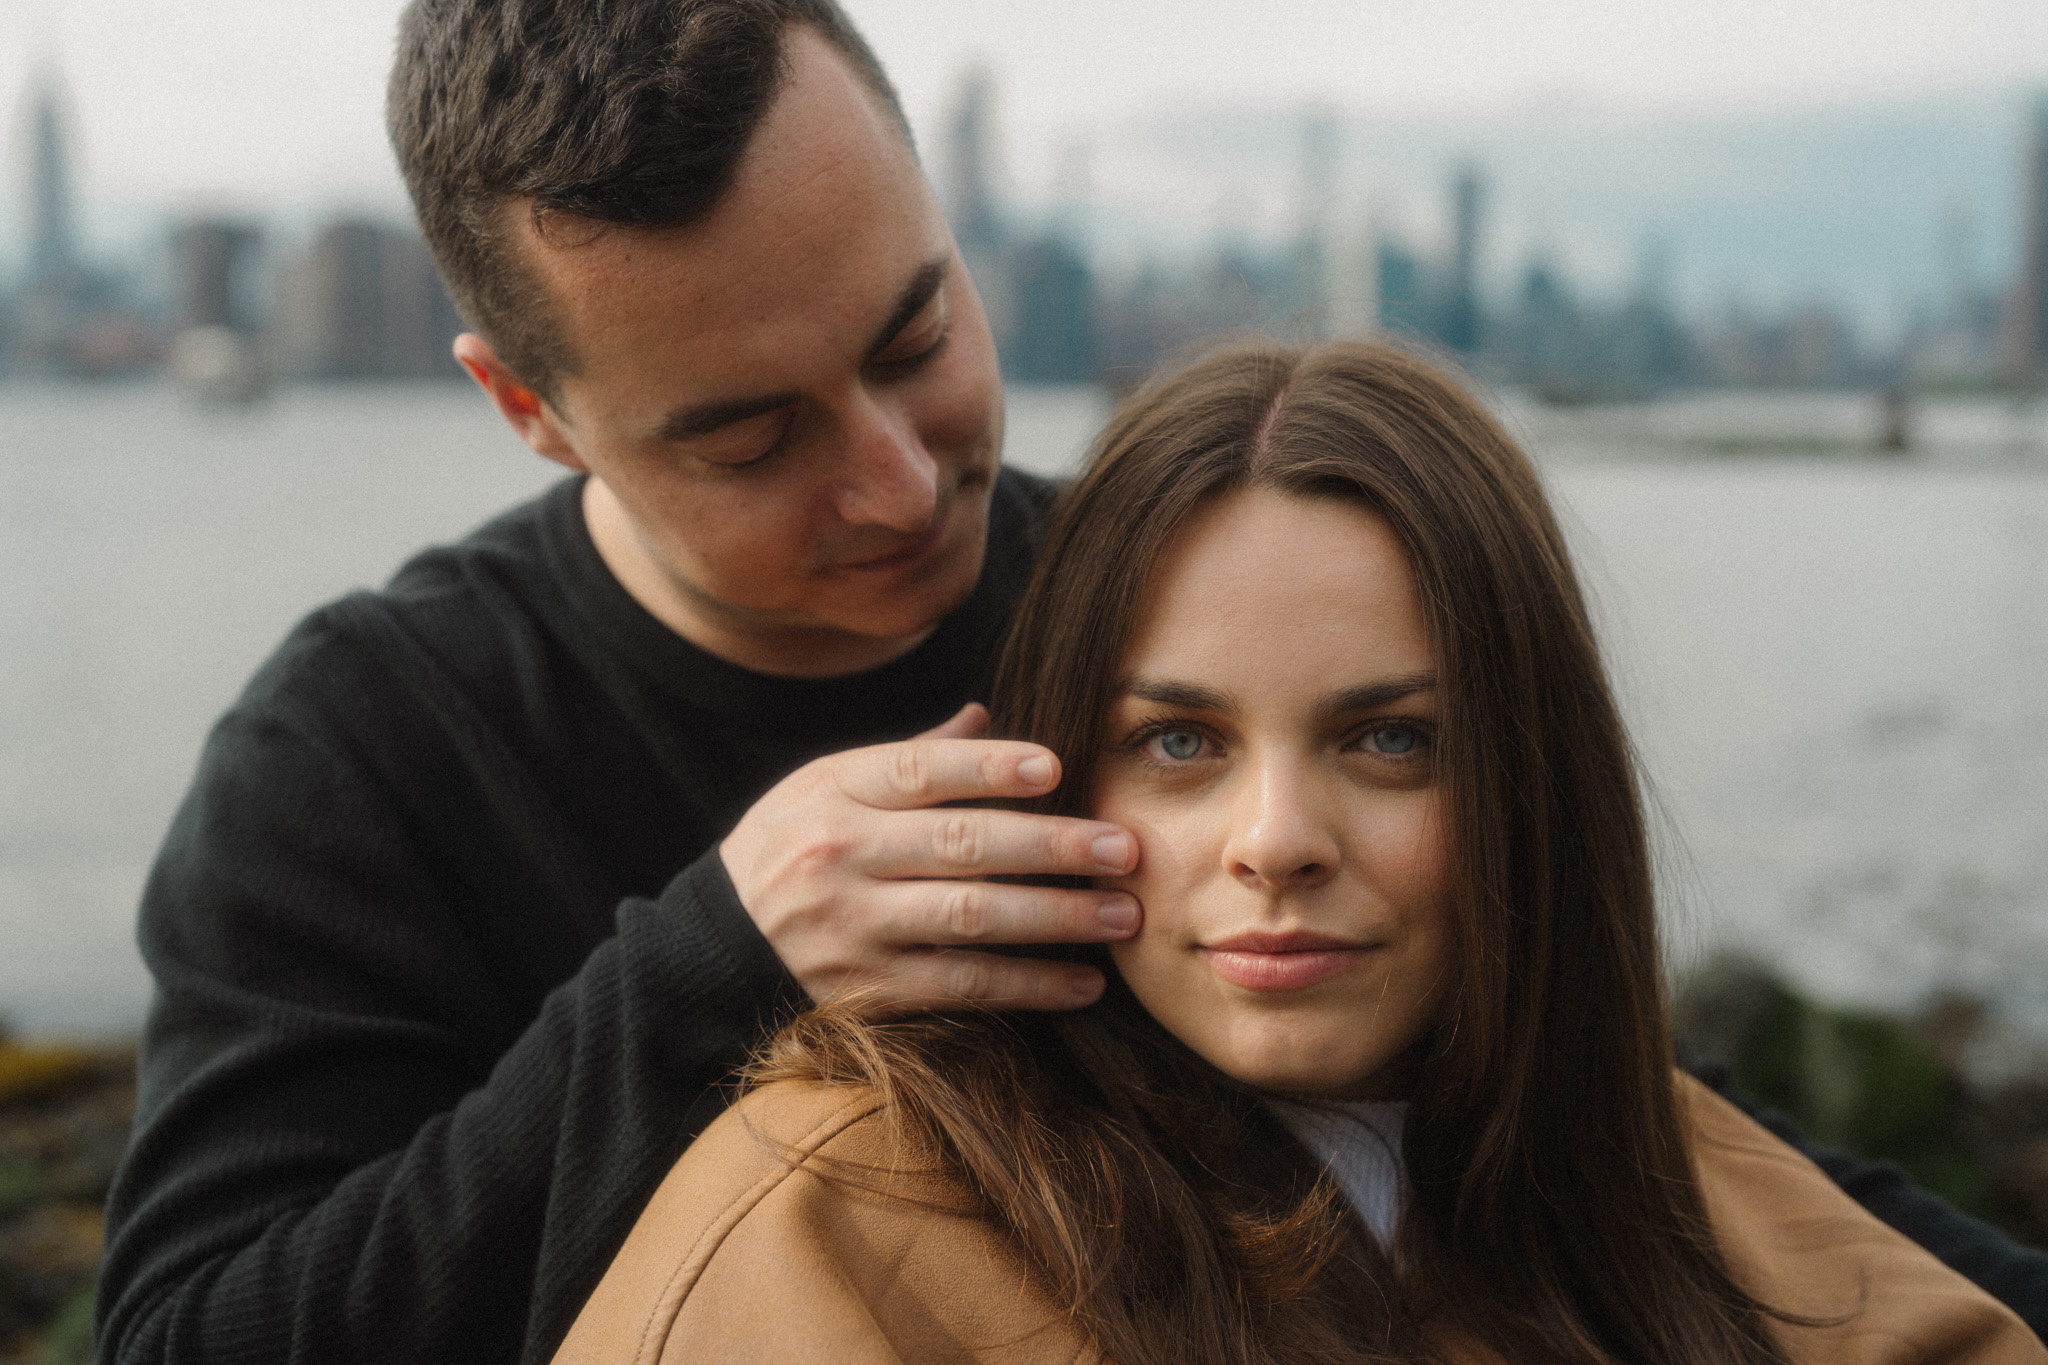 In front of the NYC skyline, Alexis and Vin sit together while he tucks her hair behind her ear.